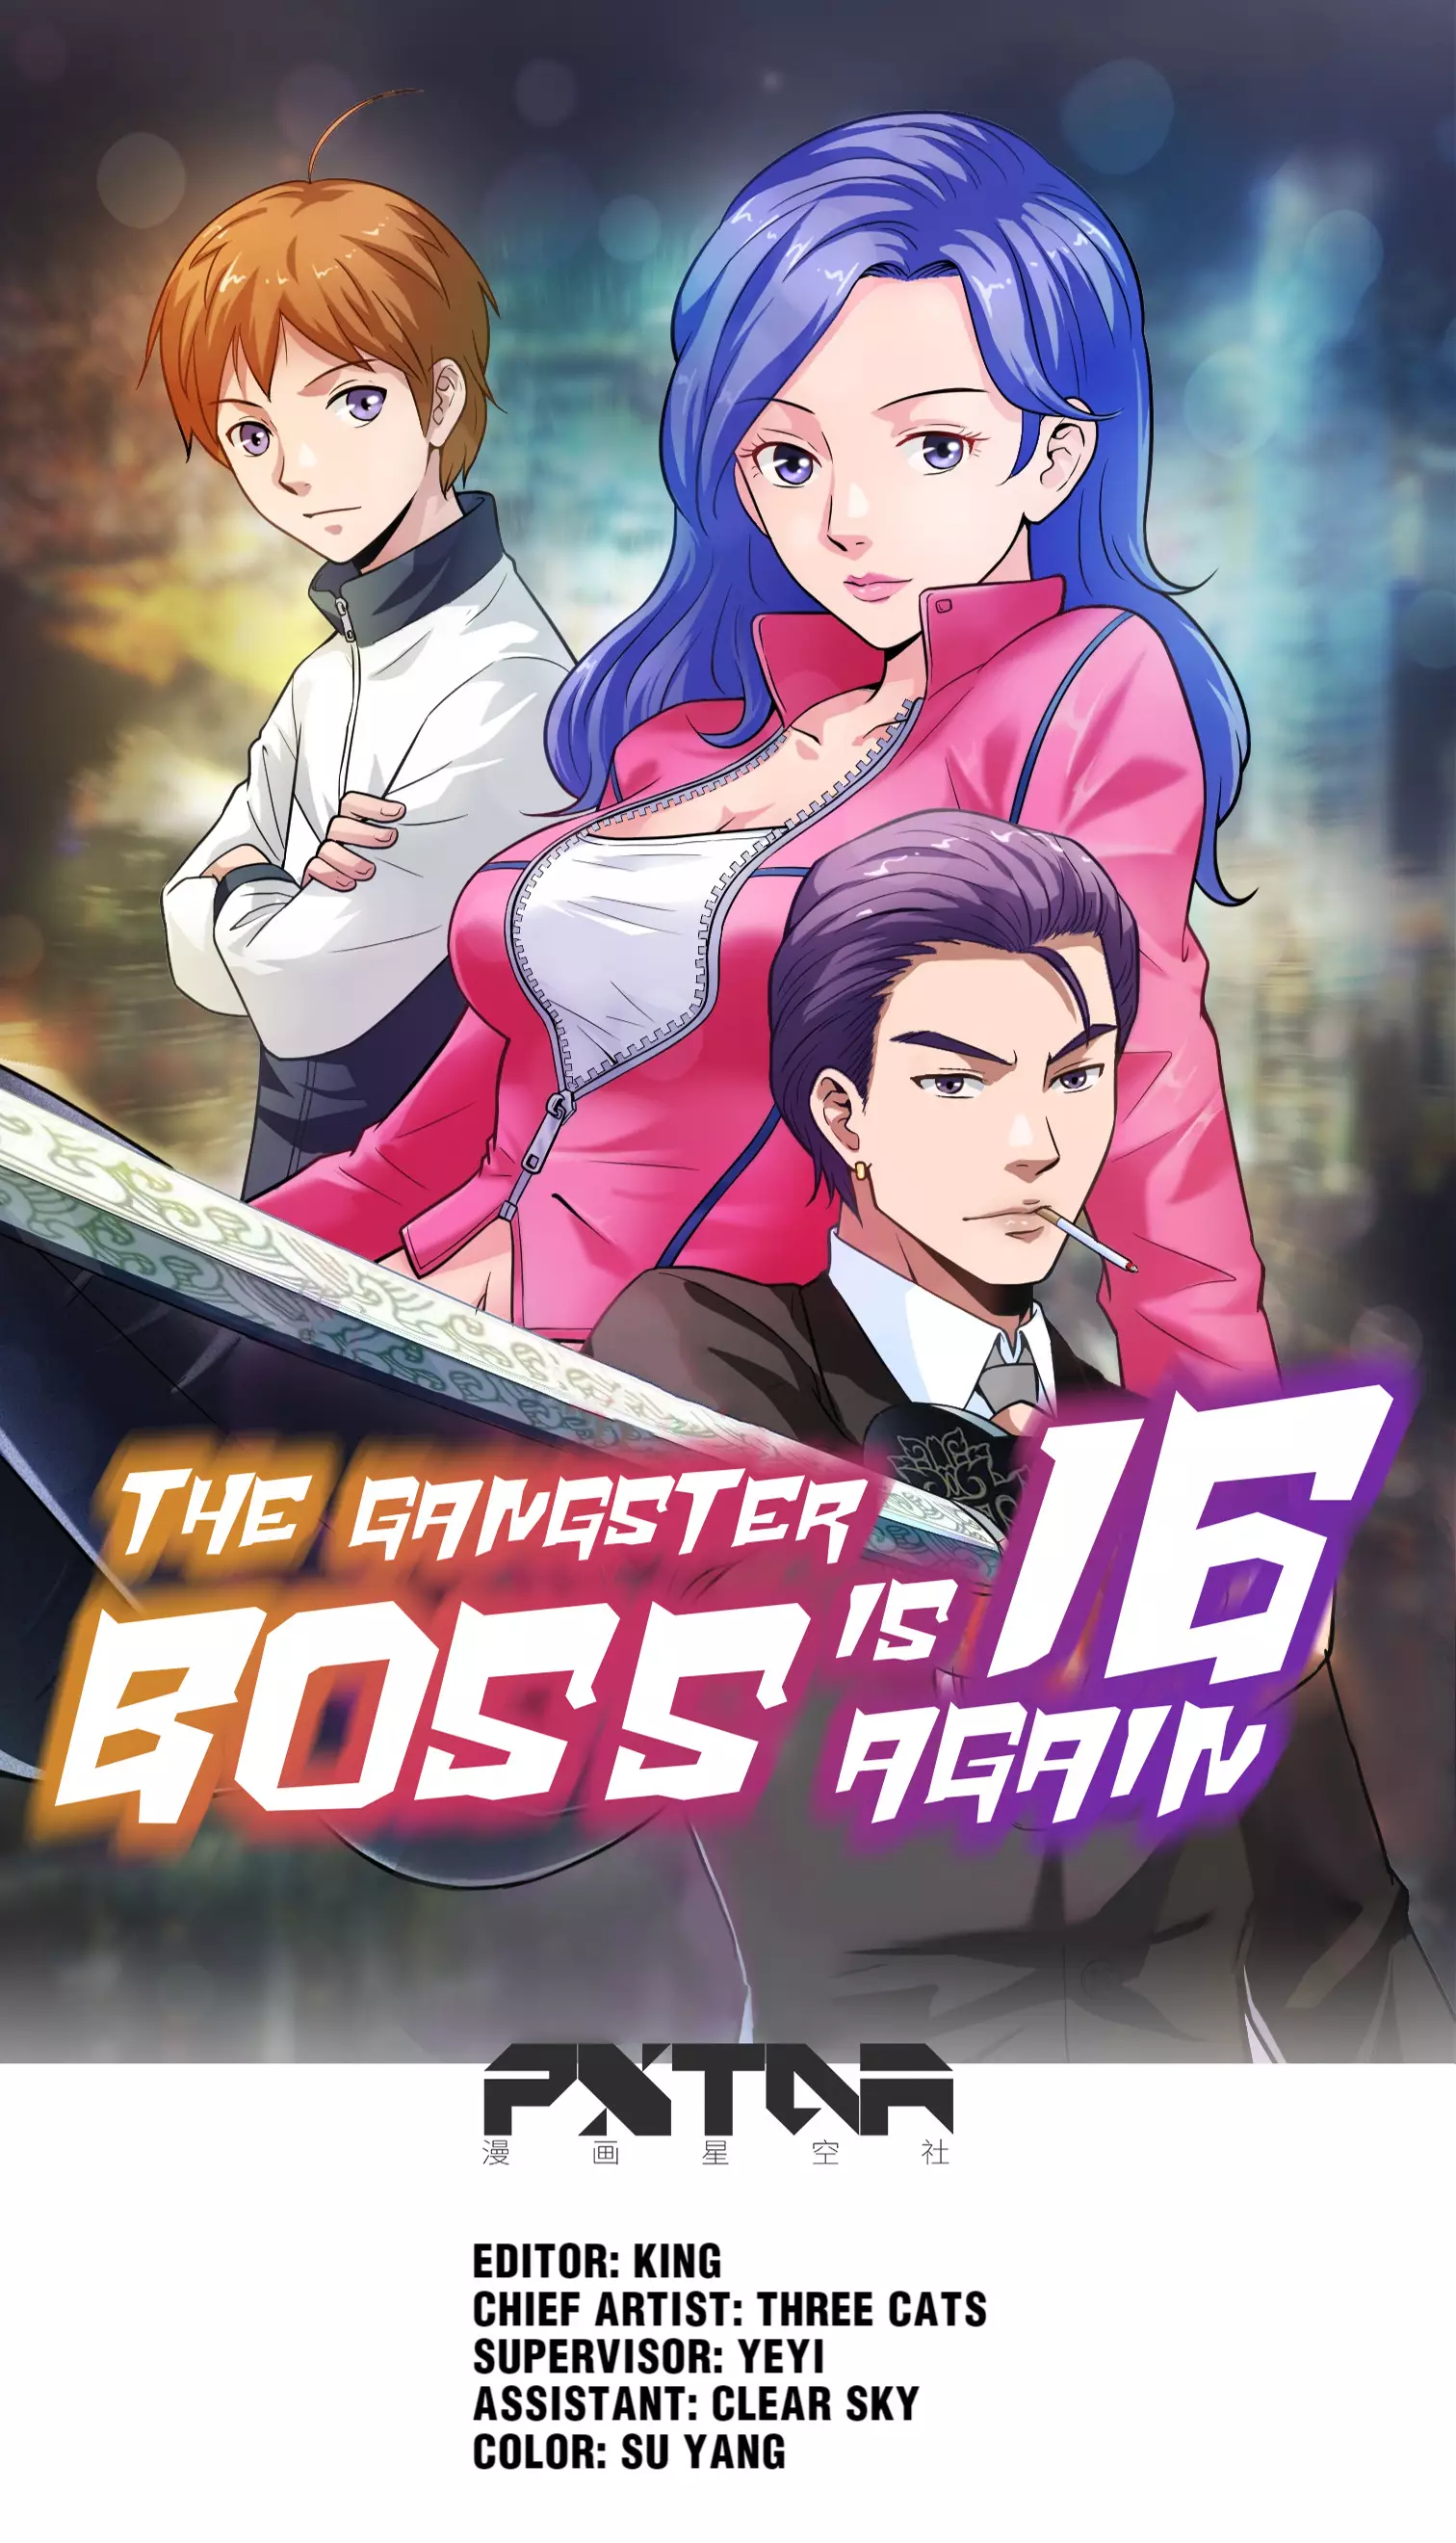 The Gangster Boss Is 16 Again - 64.1 page 1-b4c3ab0c